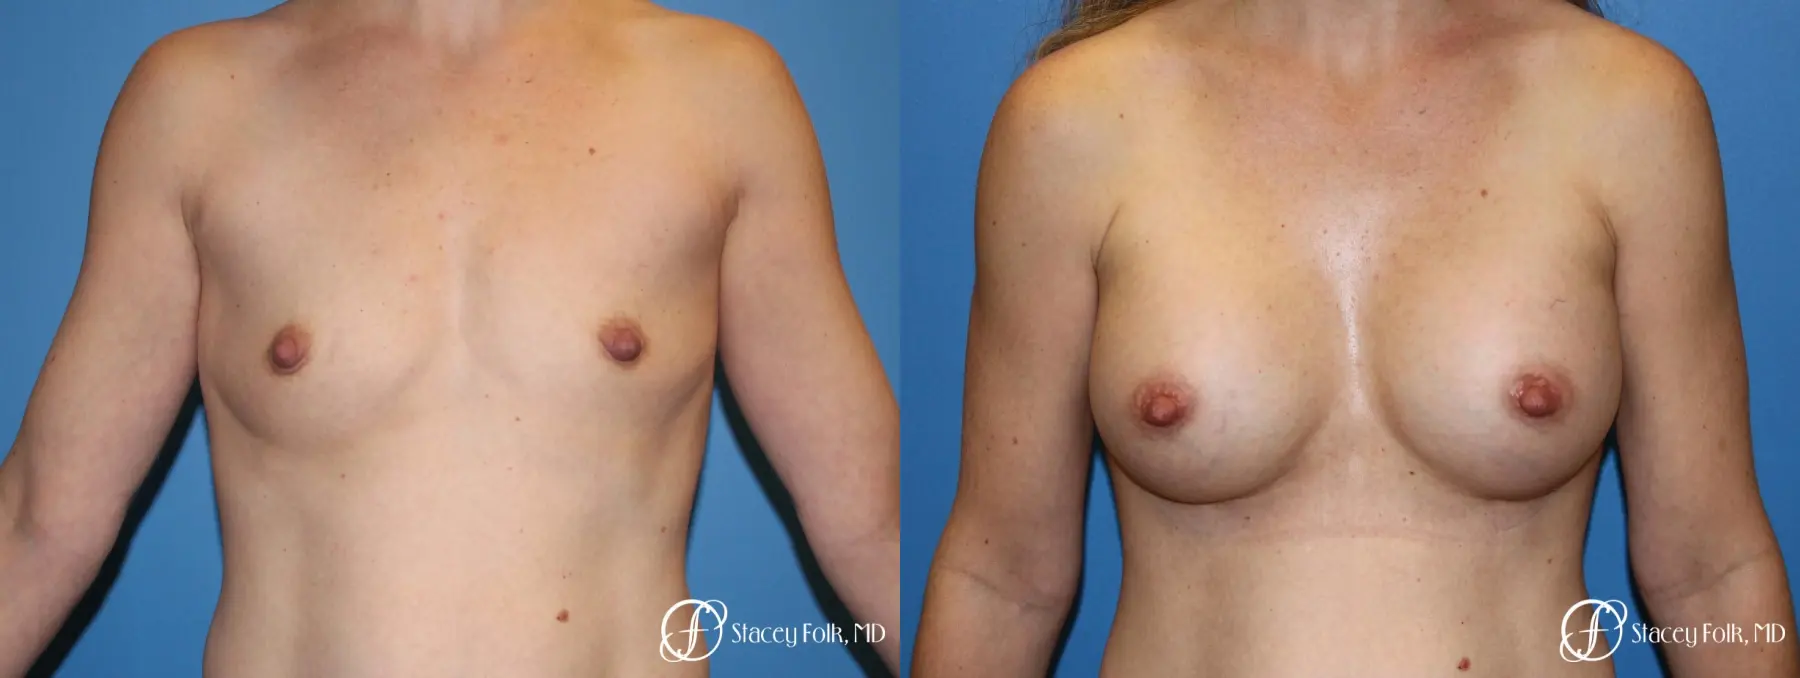 Denver Breast Augmentation using Textured Sientra Breast Implants 8414 - Before and After